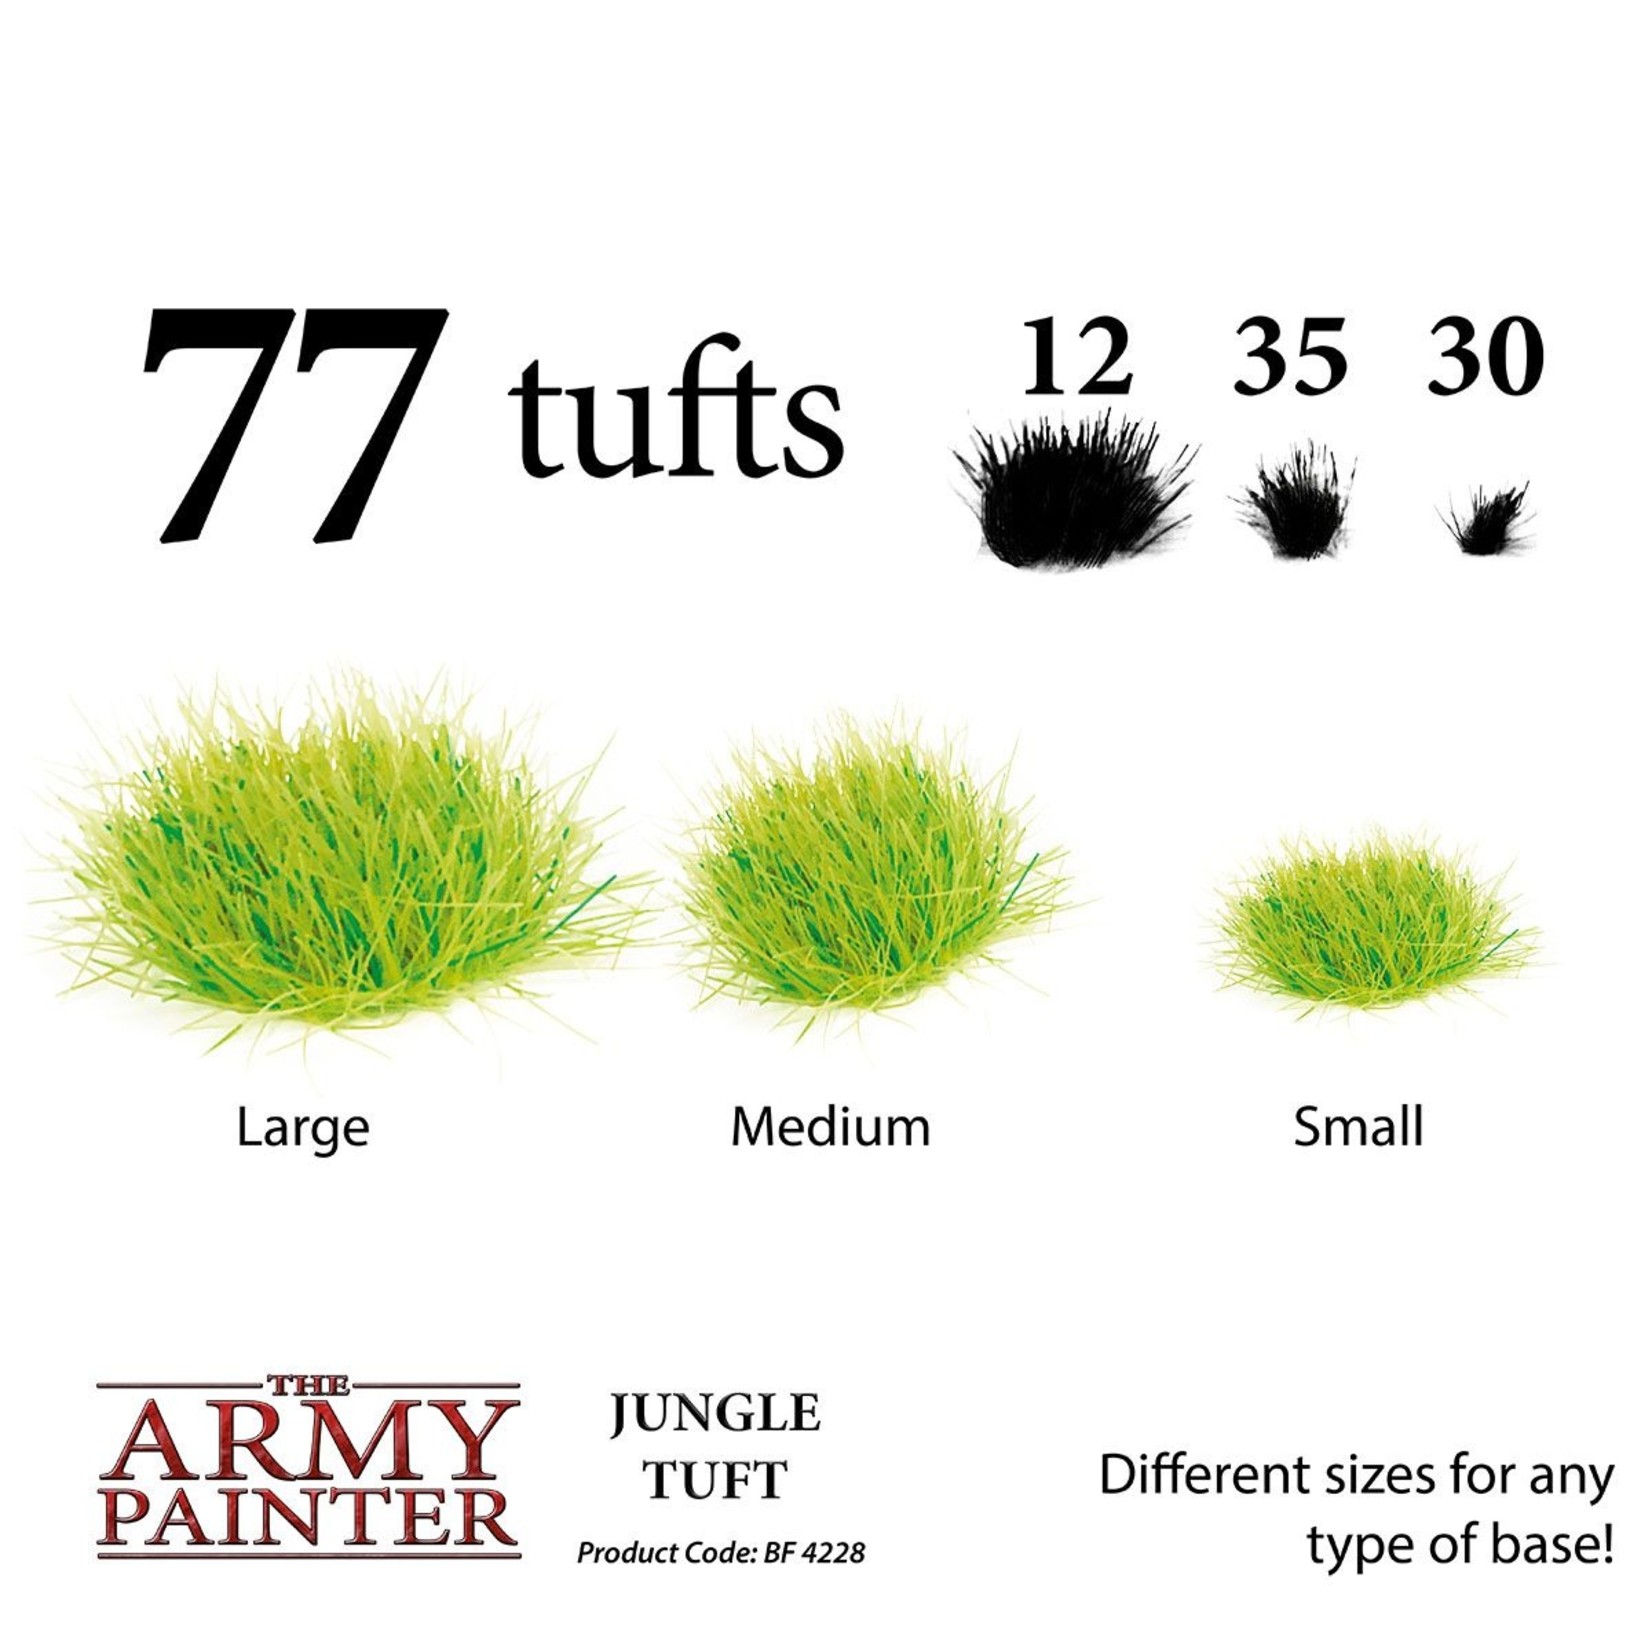 Army Painter Army Battlefields Jungle Tuft